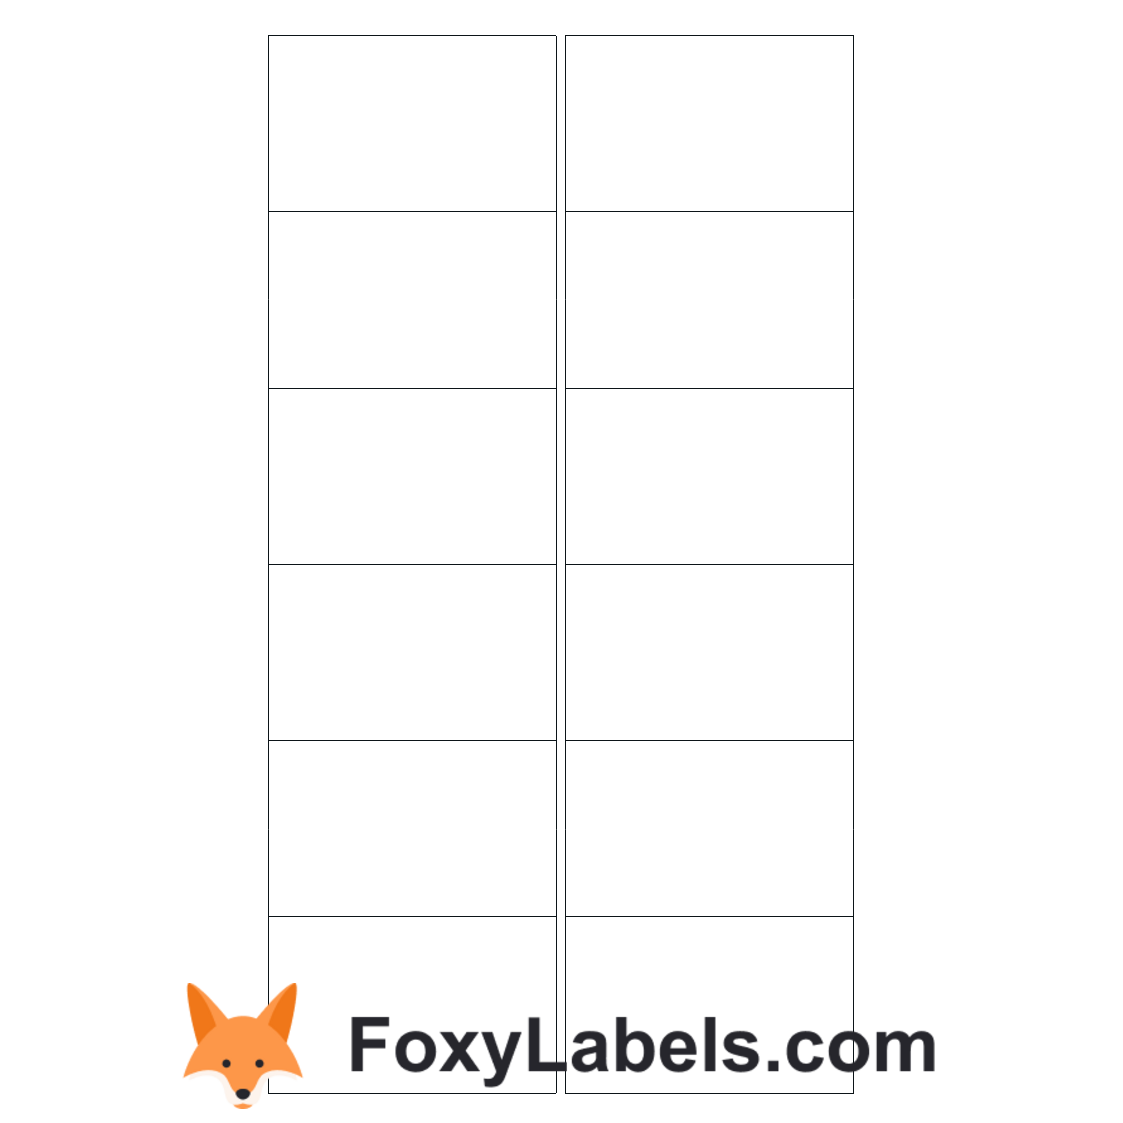 Avery L7671 label template for Google Docs